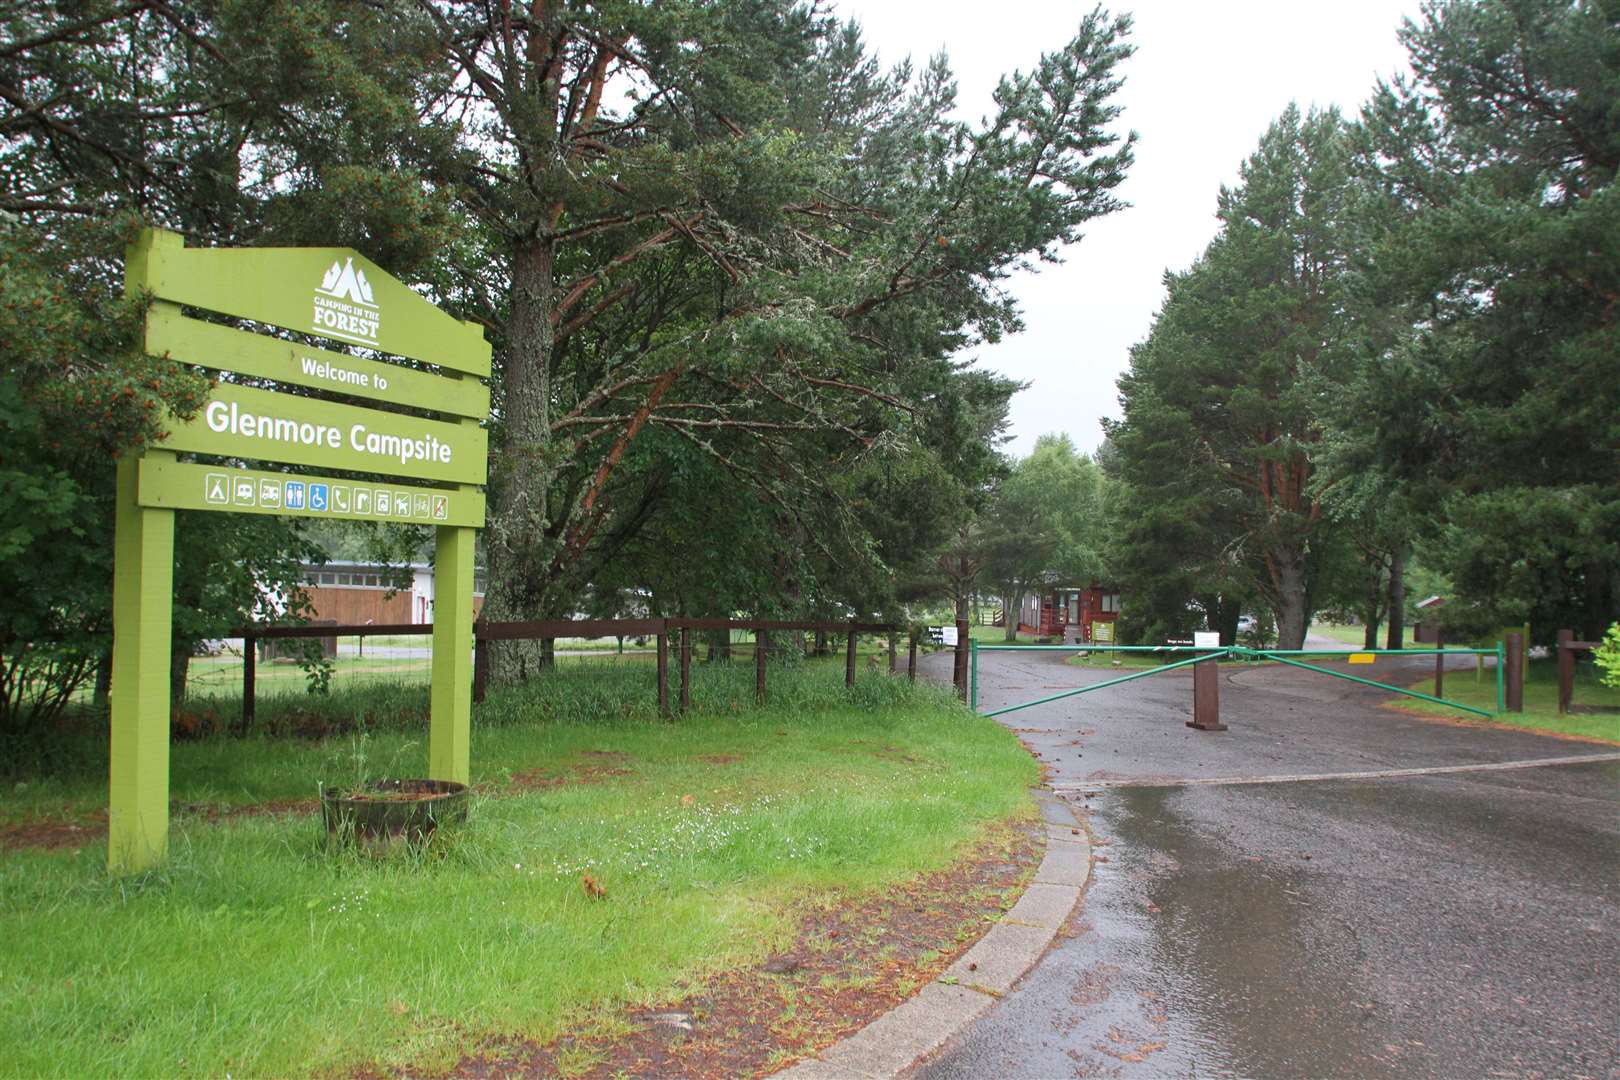 The gates at Glenmore Campsite were locked for a year.